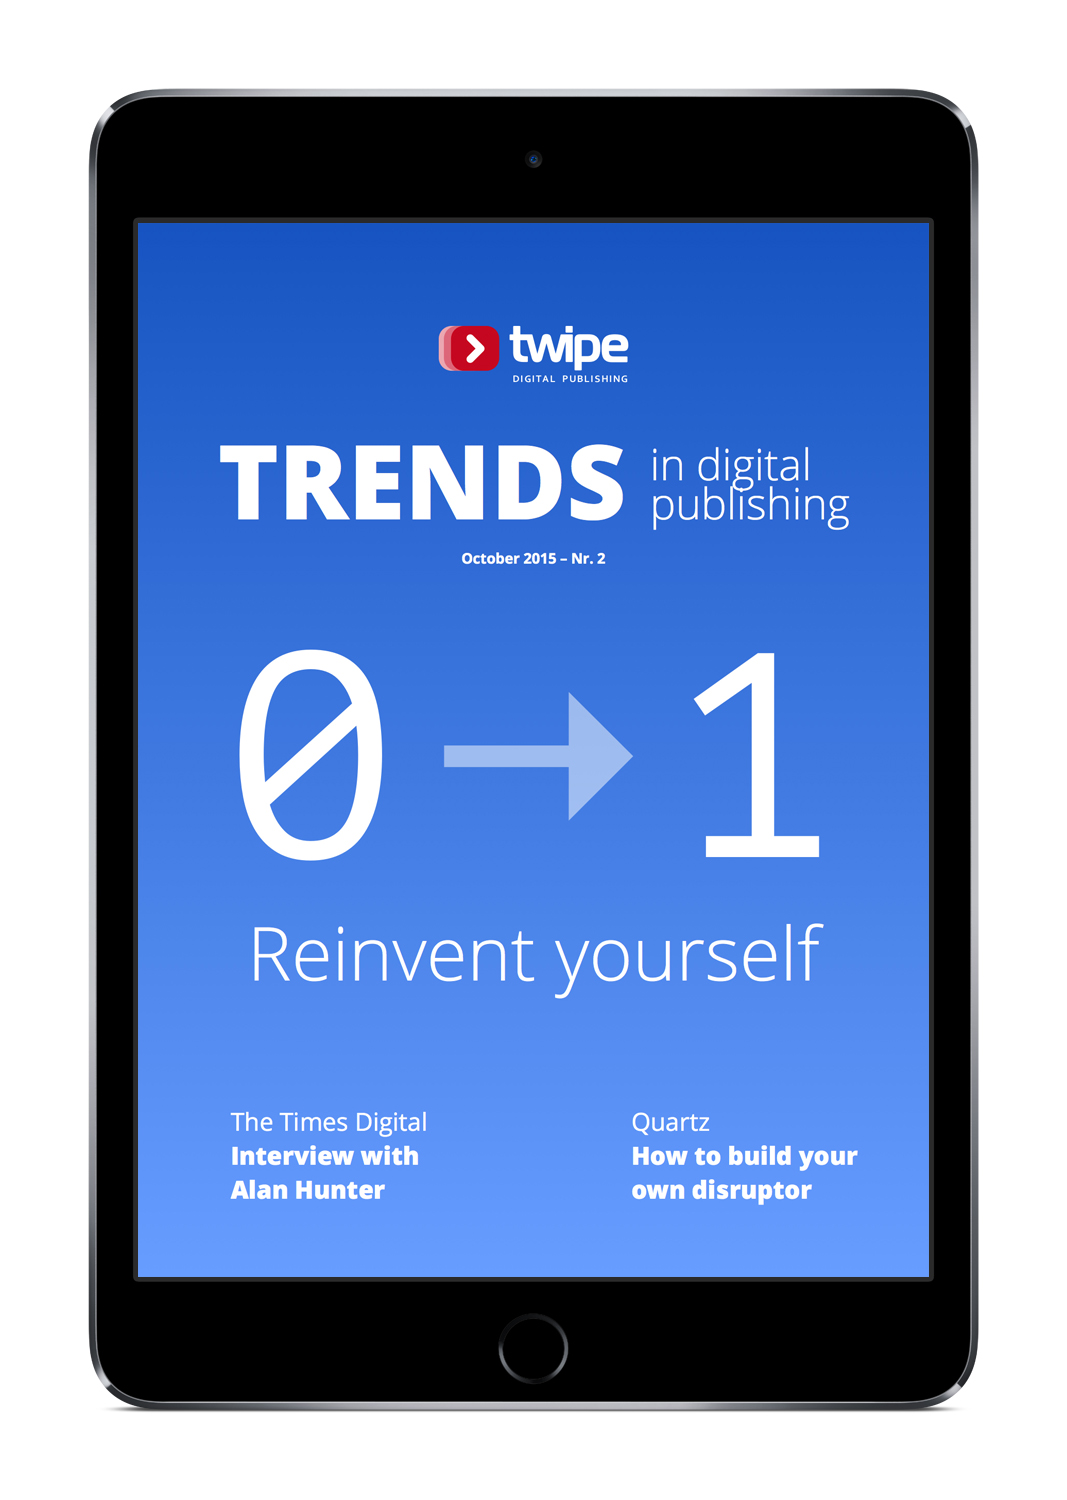 Trends in Digital Publishing - Second edition - reinvent yourself